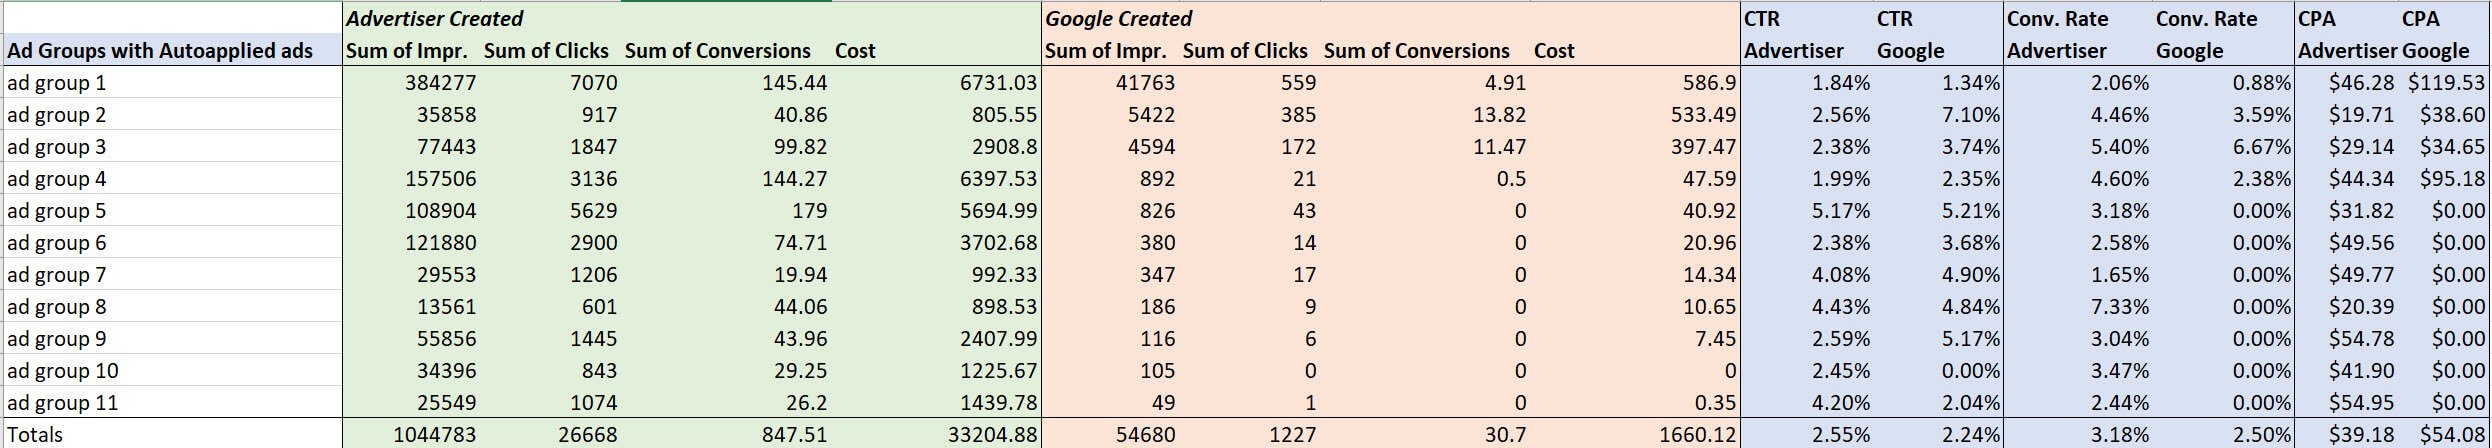 Comparison of Google Ads suggestions and manually created ads performance